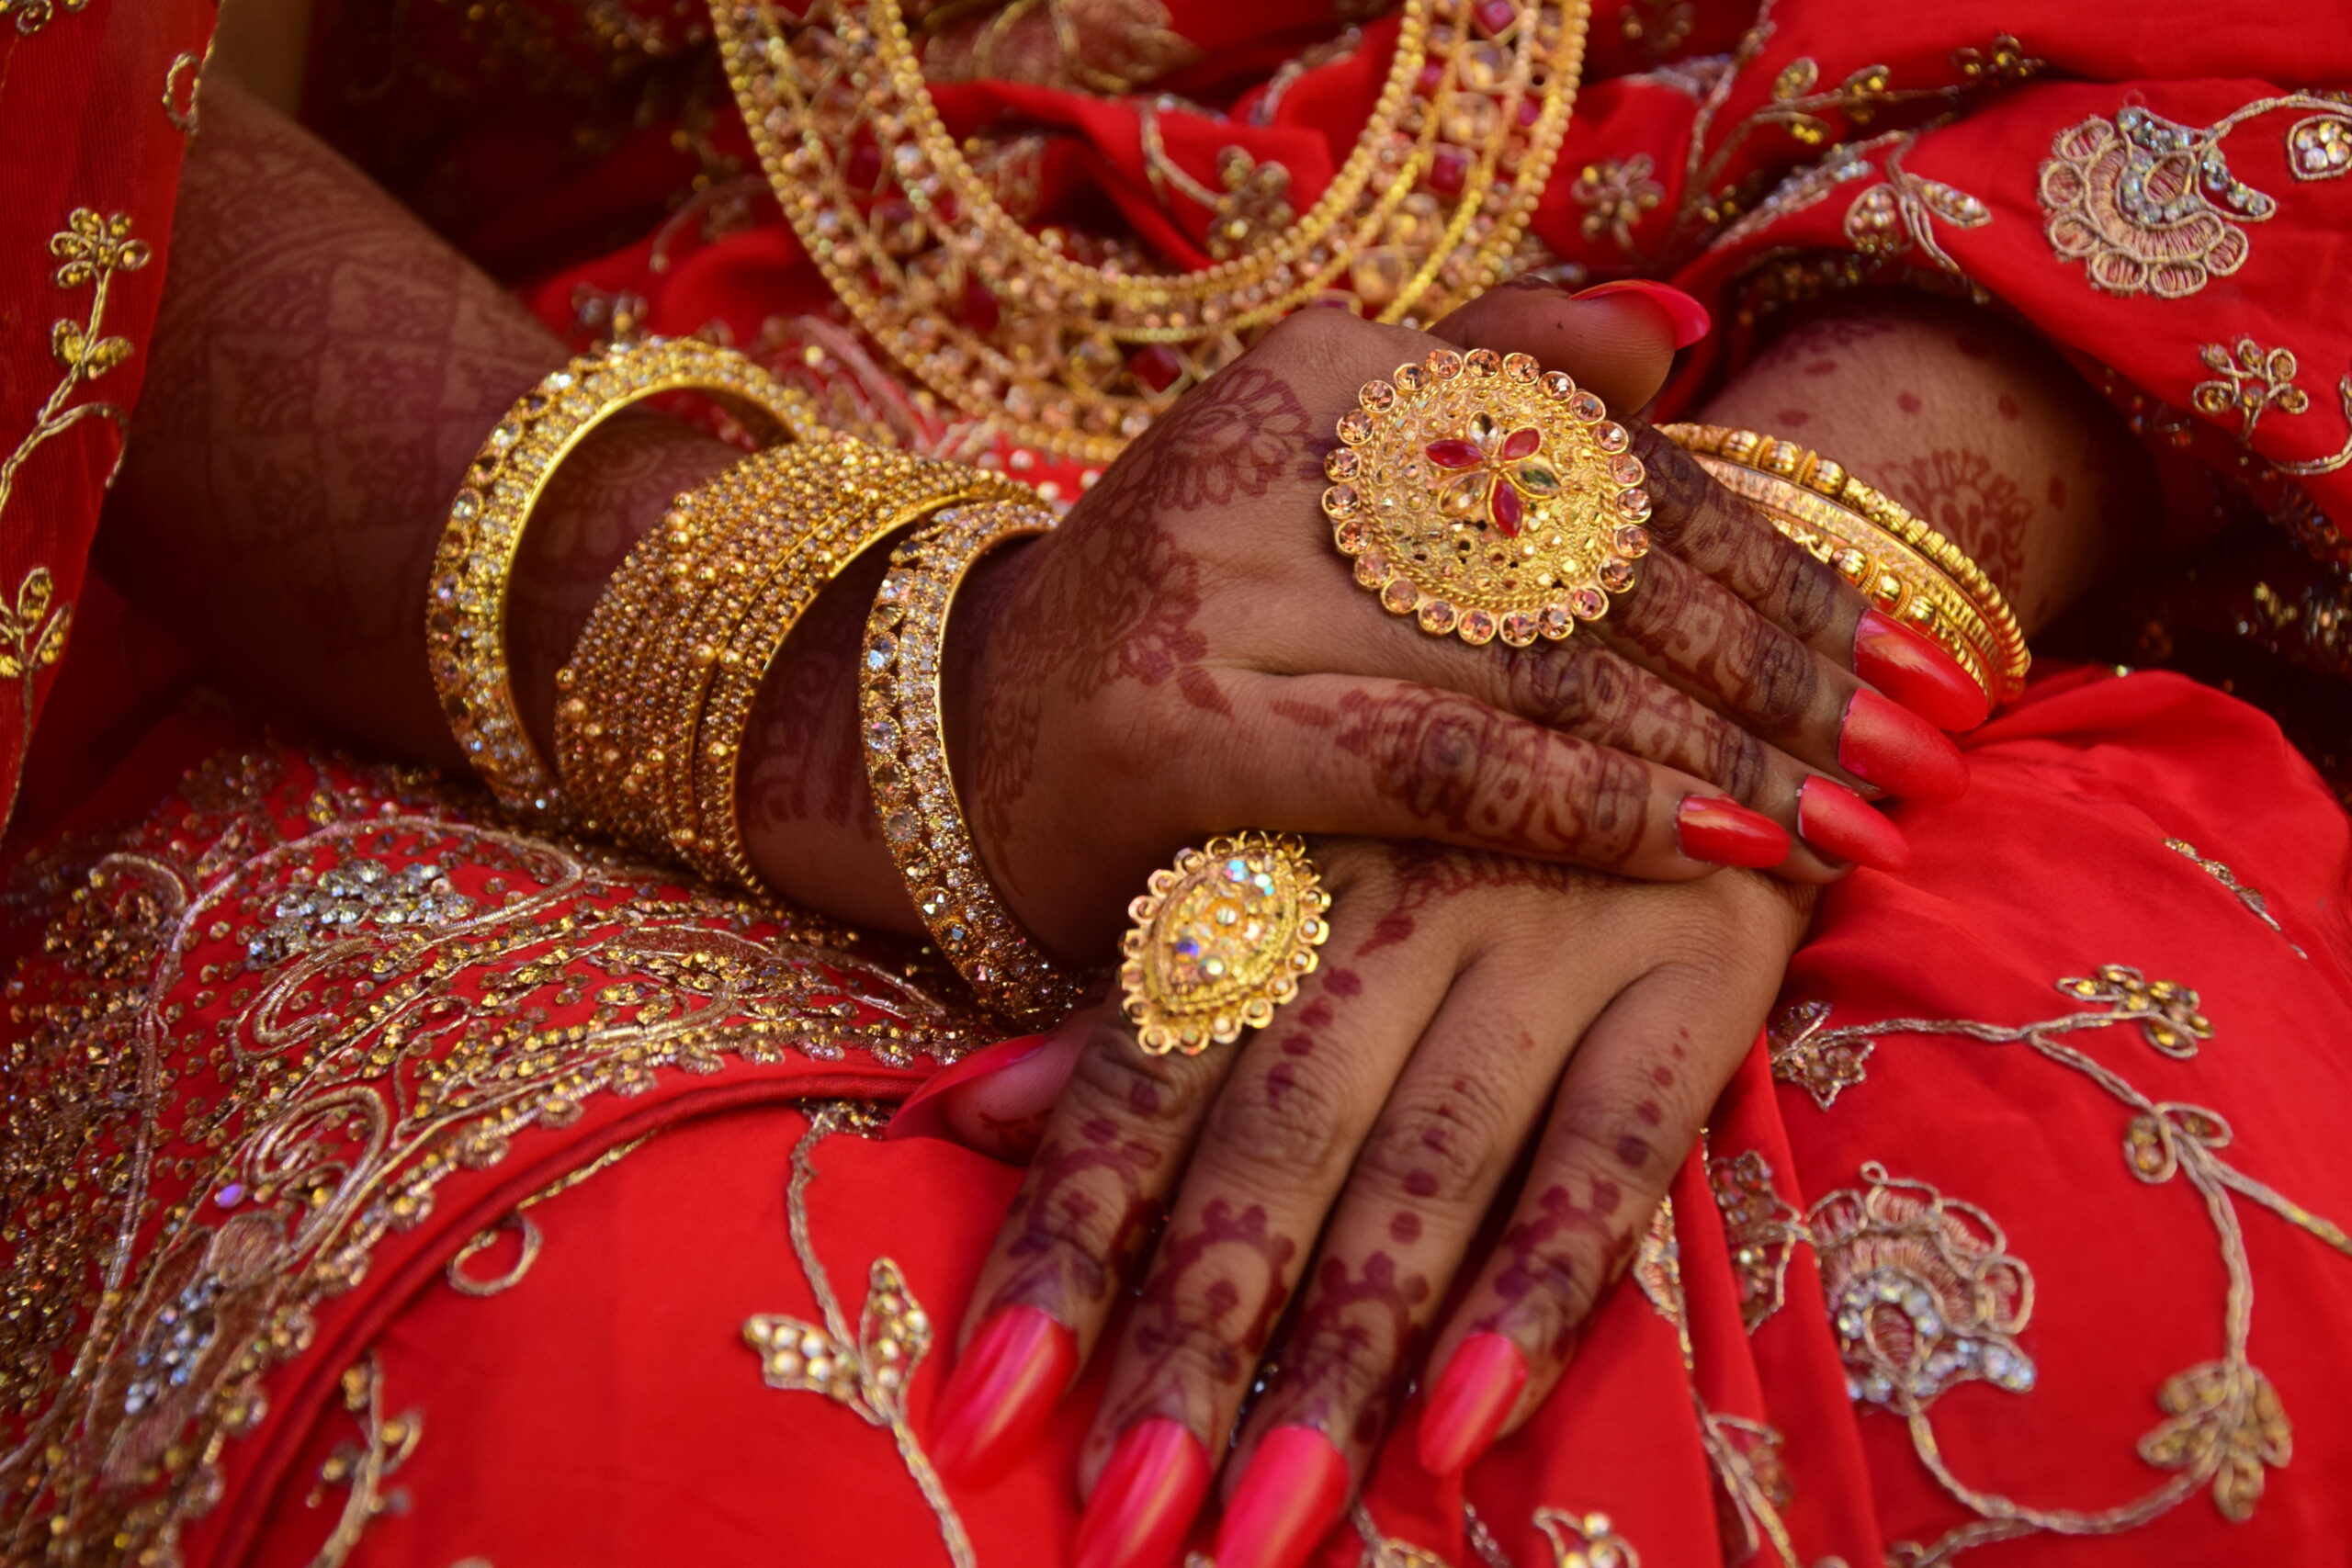 South Asian woman wearing mehendi and gold jewellery